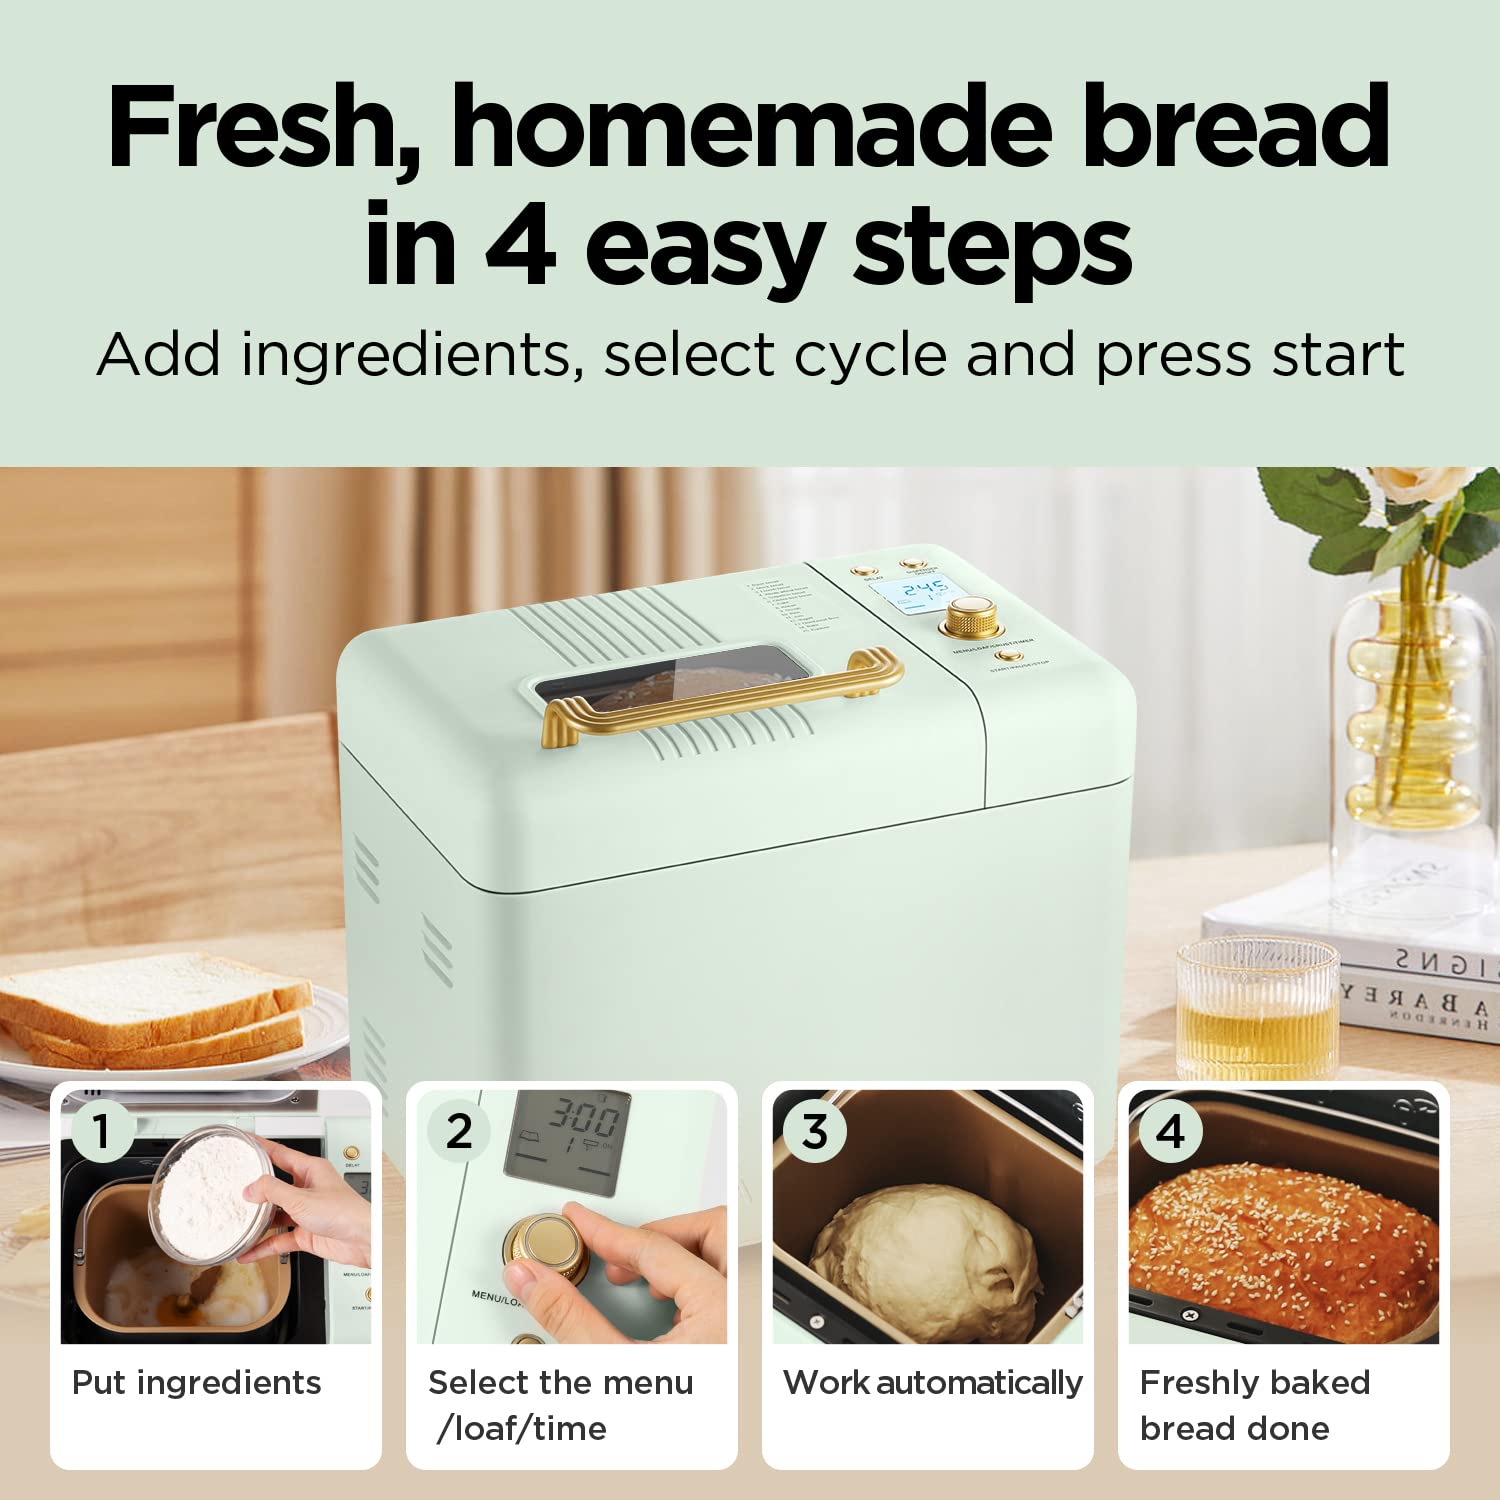 Neretva Bread Maker Machine, 15-in-1 2LB Automatic Breadmaker with Gluten Free Sourdough Setting, Auto Nut Dispenser, Digital, 1 Hour Keep Warm, 2 Loaf Sizes, 3 Crust Colors - Receipe Booked Included